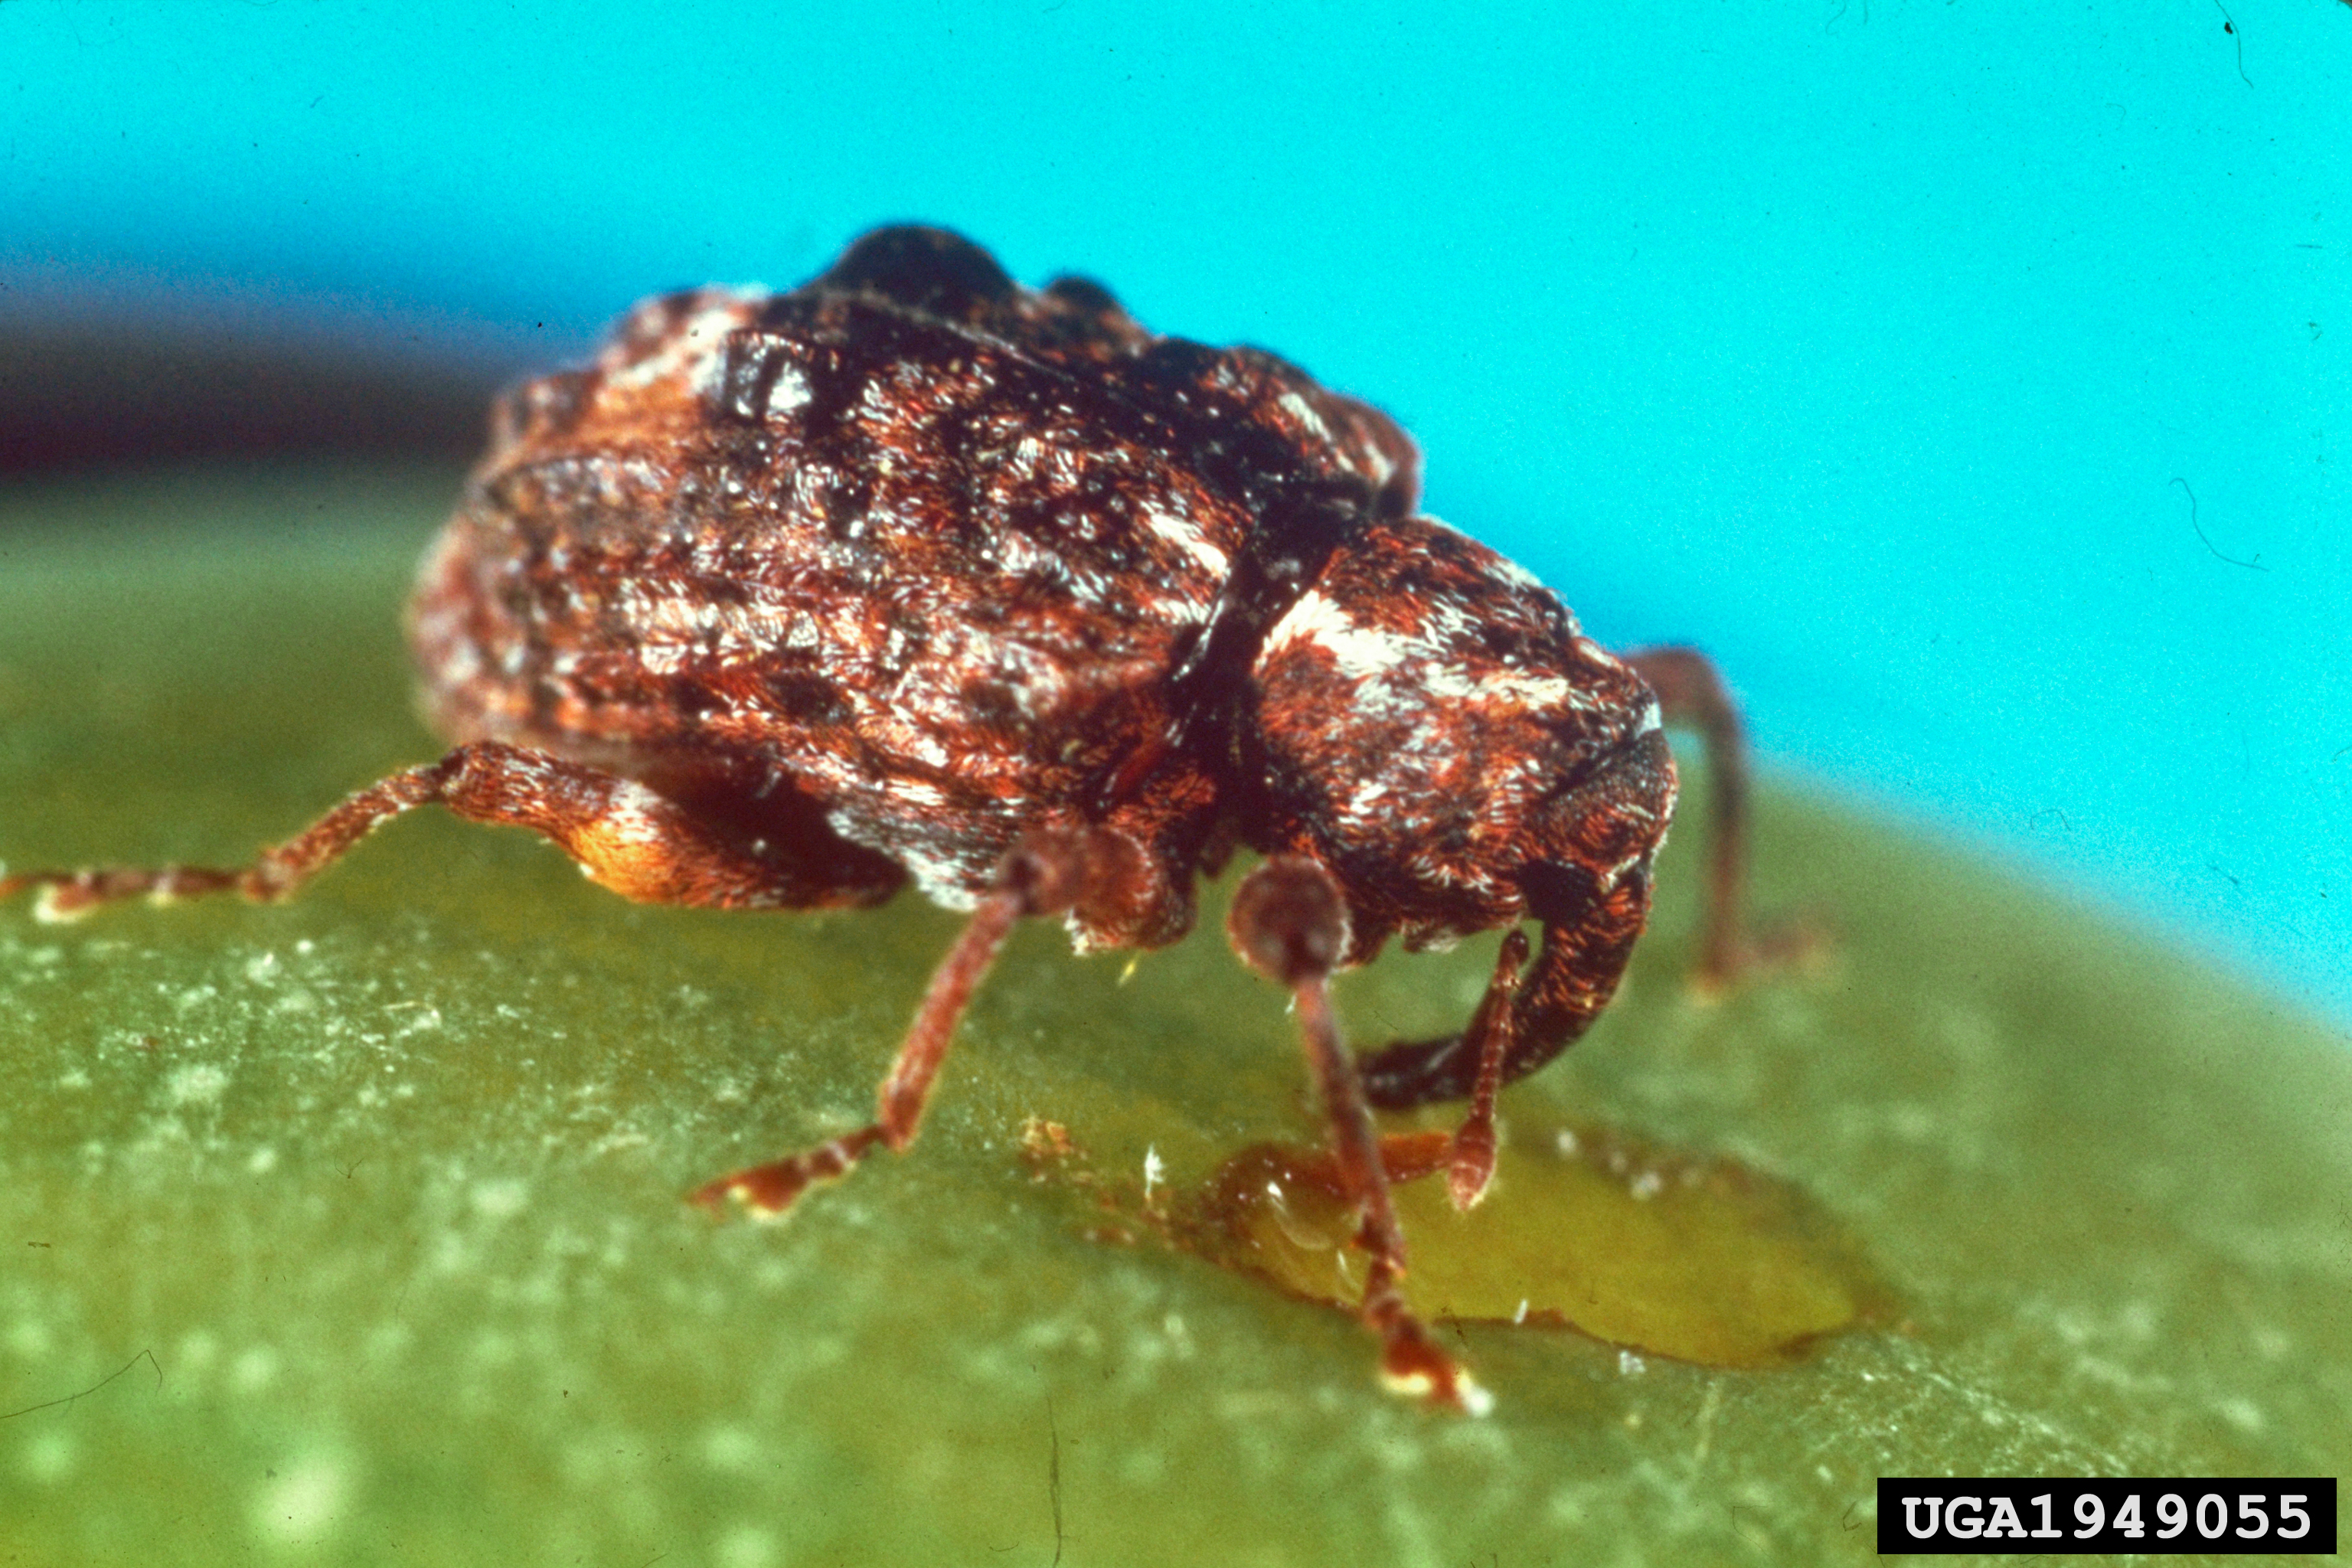 Reddish brown weevil with large snout on a bright green leaf